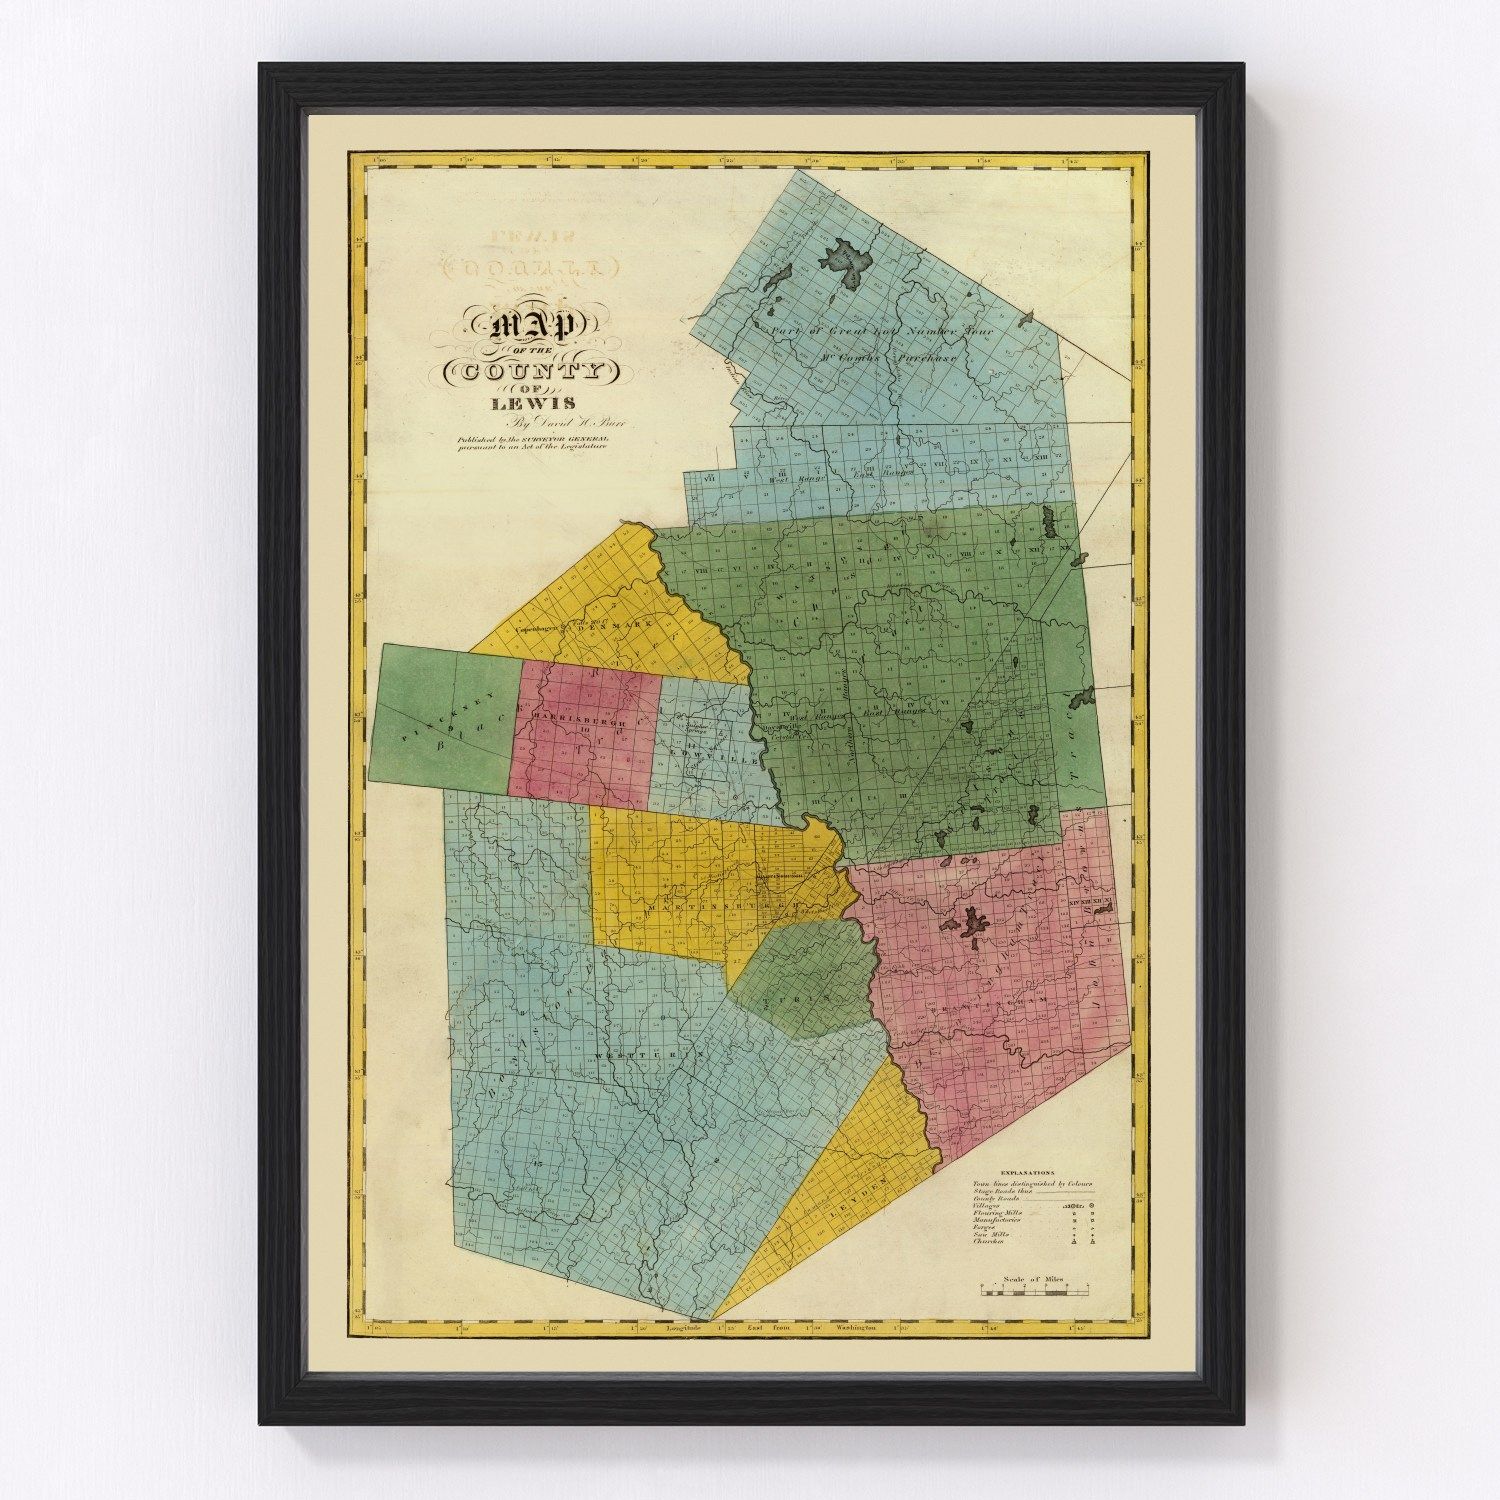 Vintage Map of Lewis County New York, 1829